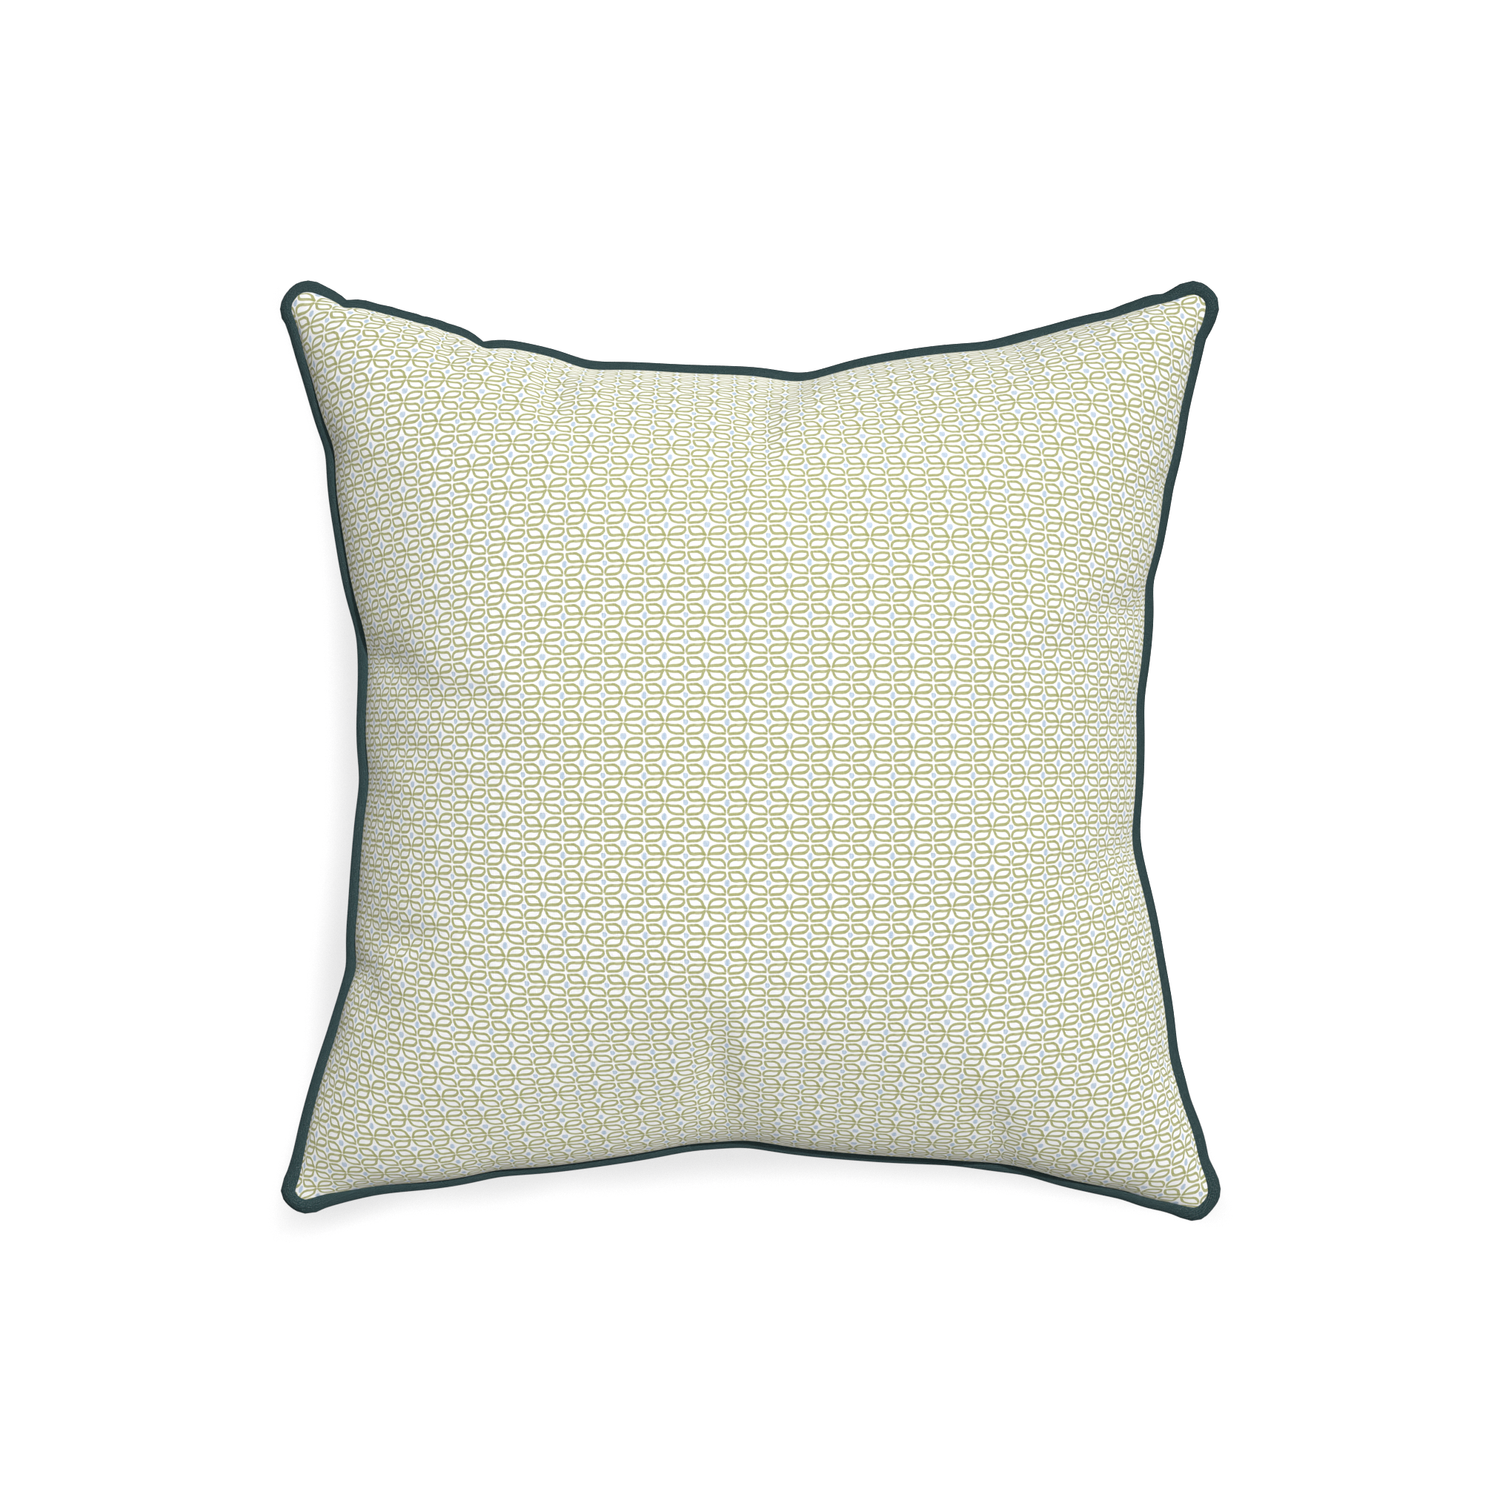 20-square loomi moss custom moss green geometricpillow with p piping on white background